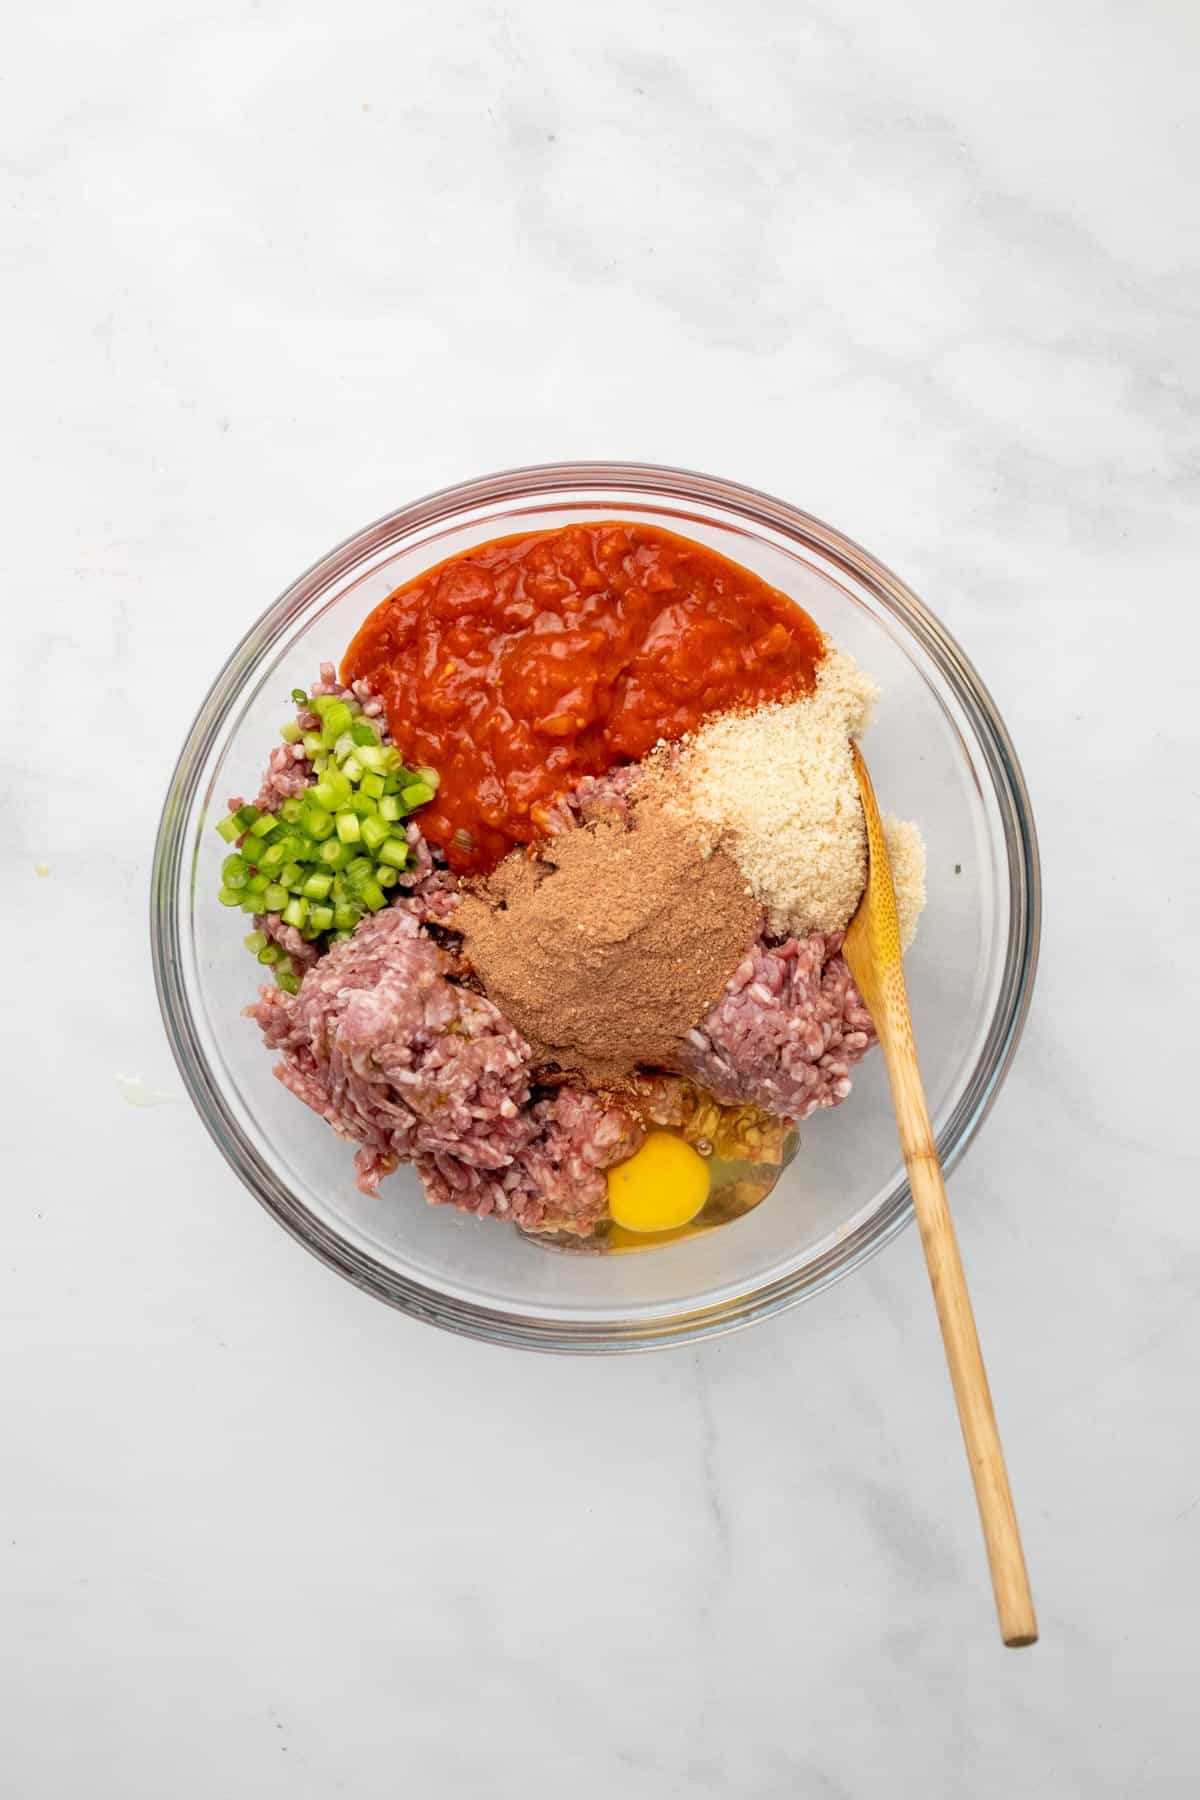 Meatloaf ingredients in a glass bowl with a wooden spoon, unmixed